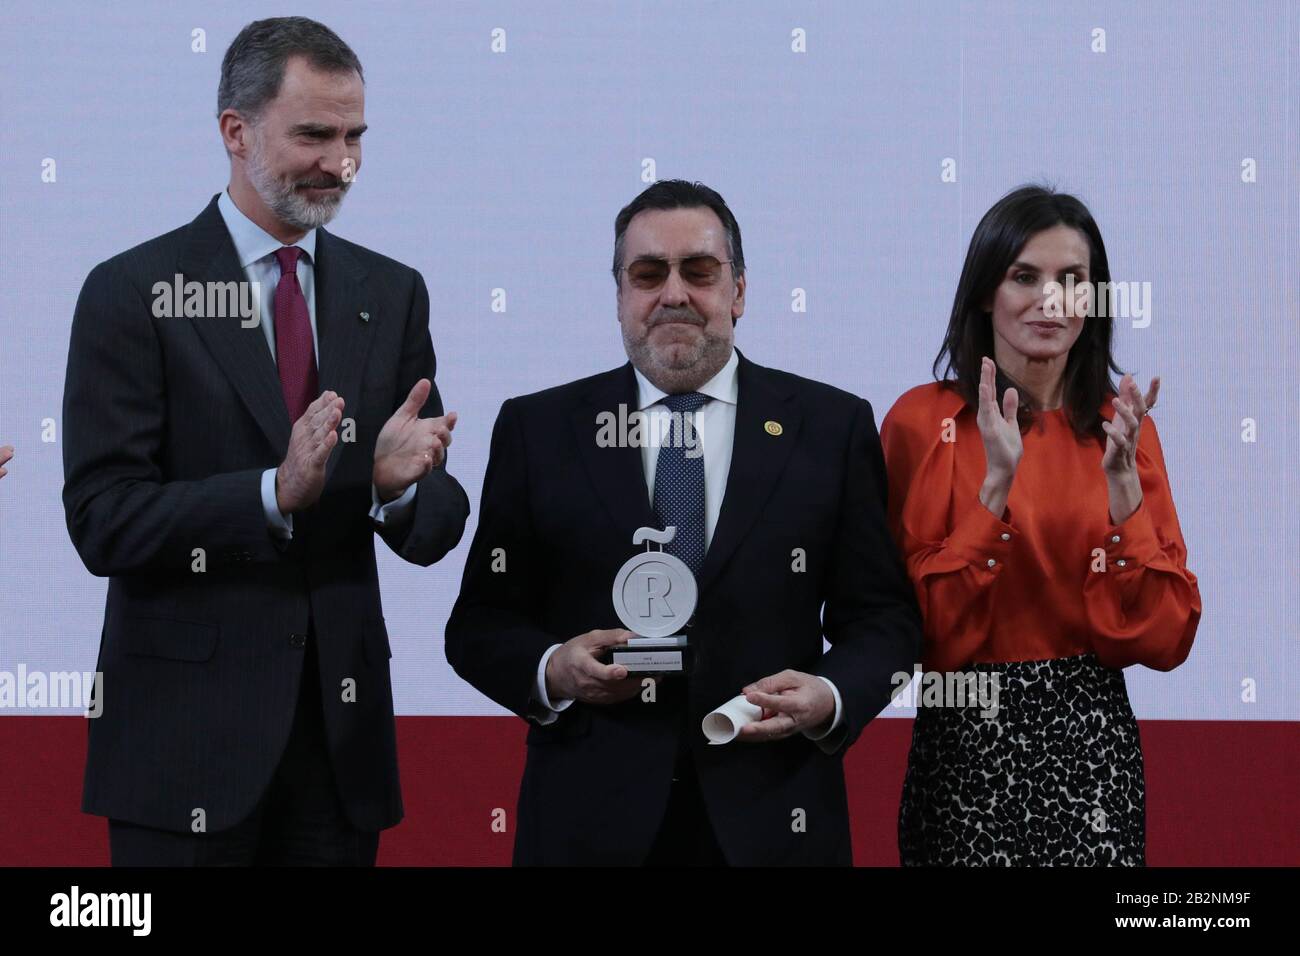 Madrid, Spain; 03/03/2020.- Miguel Carballeda ONCE president.Kings of Spain Felipe VI and Leizia presided over the eighth delivery of honorary ambassadors of the Spain Brand to Ana Botín president of the Santander bank in the business management category, Isabel Coixet film director in the art and culture category, Carolina Marín Spanish badminton player in the Sports category for being the youngest world champion in Europe (absent), Francisco Mojica microbiologist, researcher and Spanish professor in the Department of Physiology, Genetics and Microbiology at the University of Alicante, scienc Stock Photo